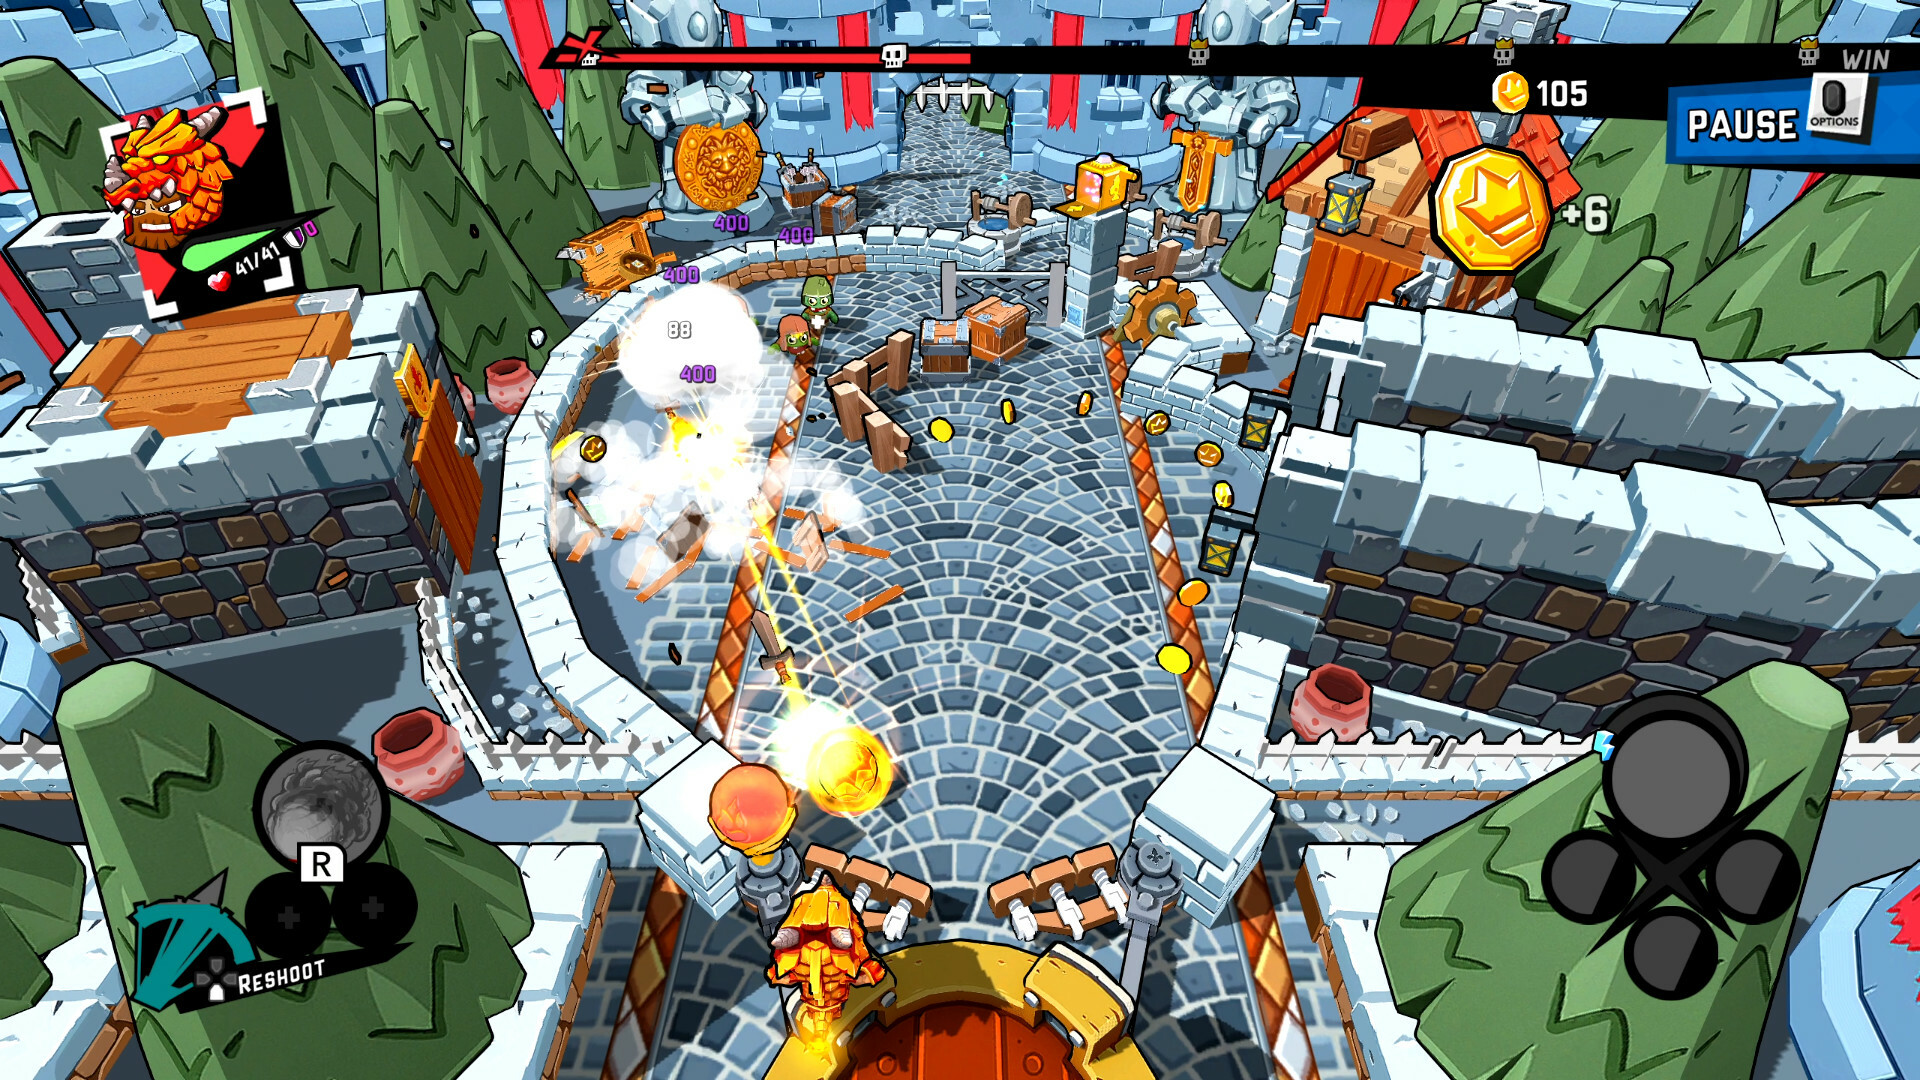 Zombie Rollerz: Pinball Heroes for windows instal